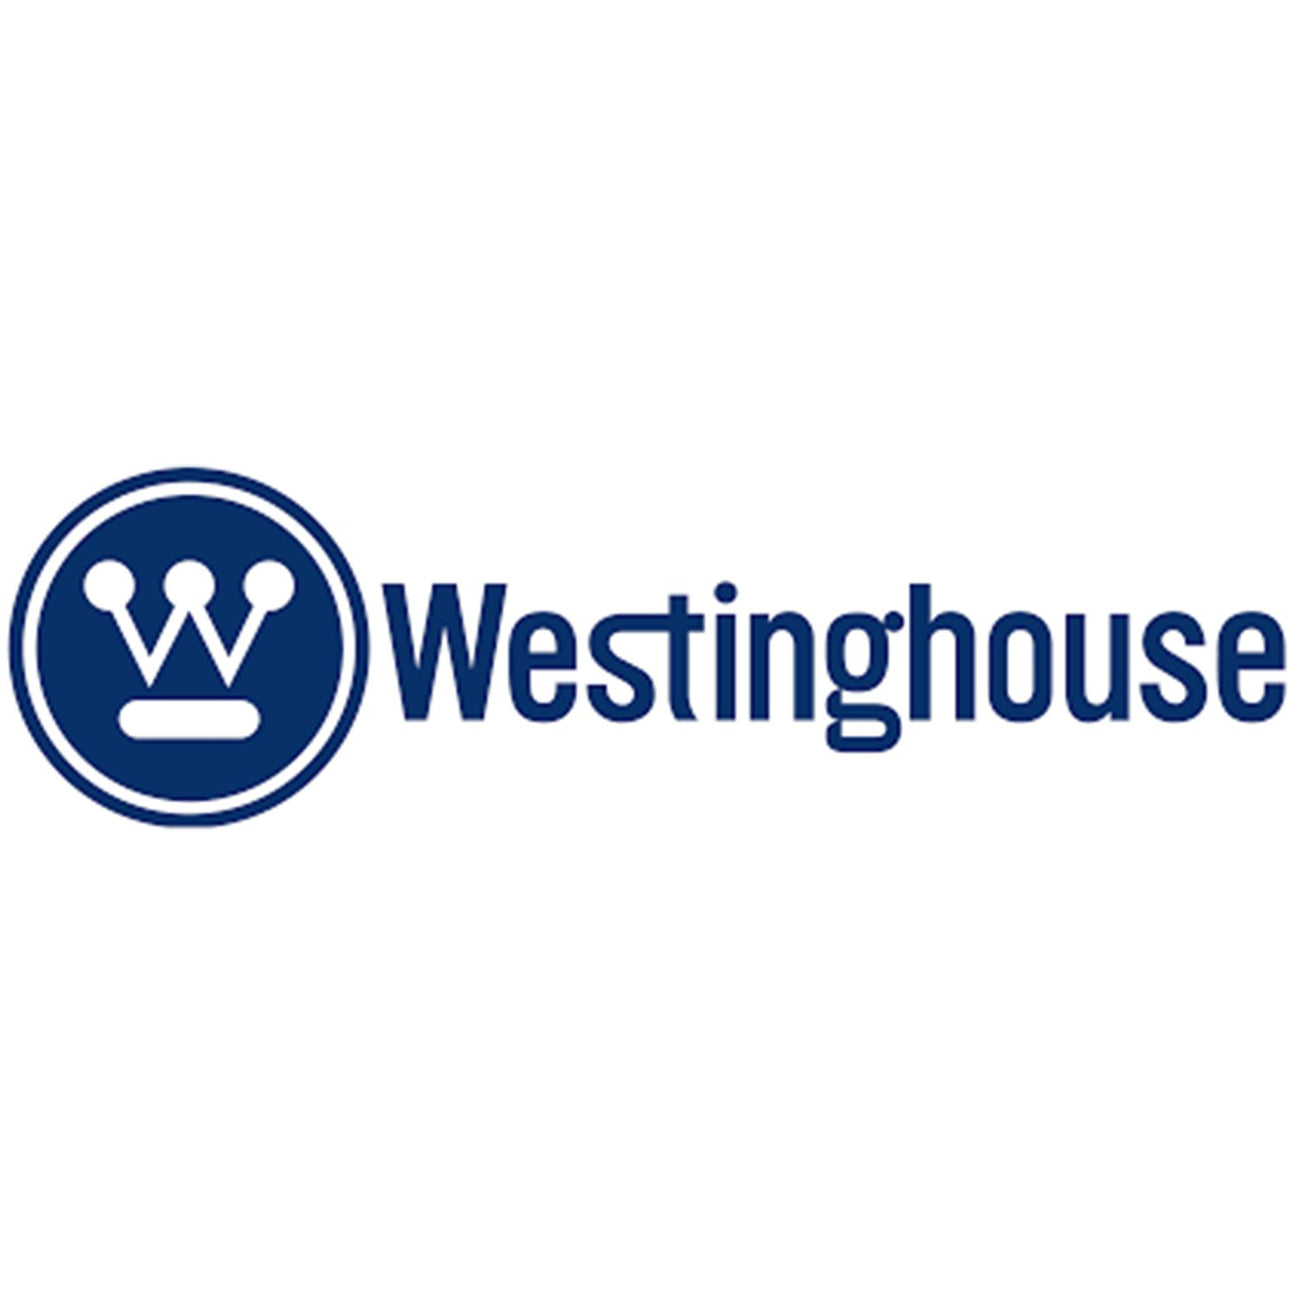 Westinghouse Washing Machine Parts - My Oven Spares